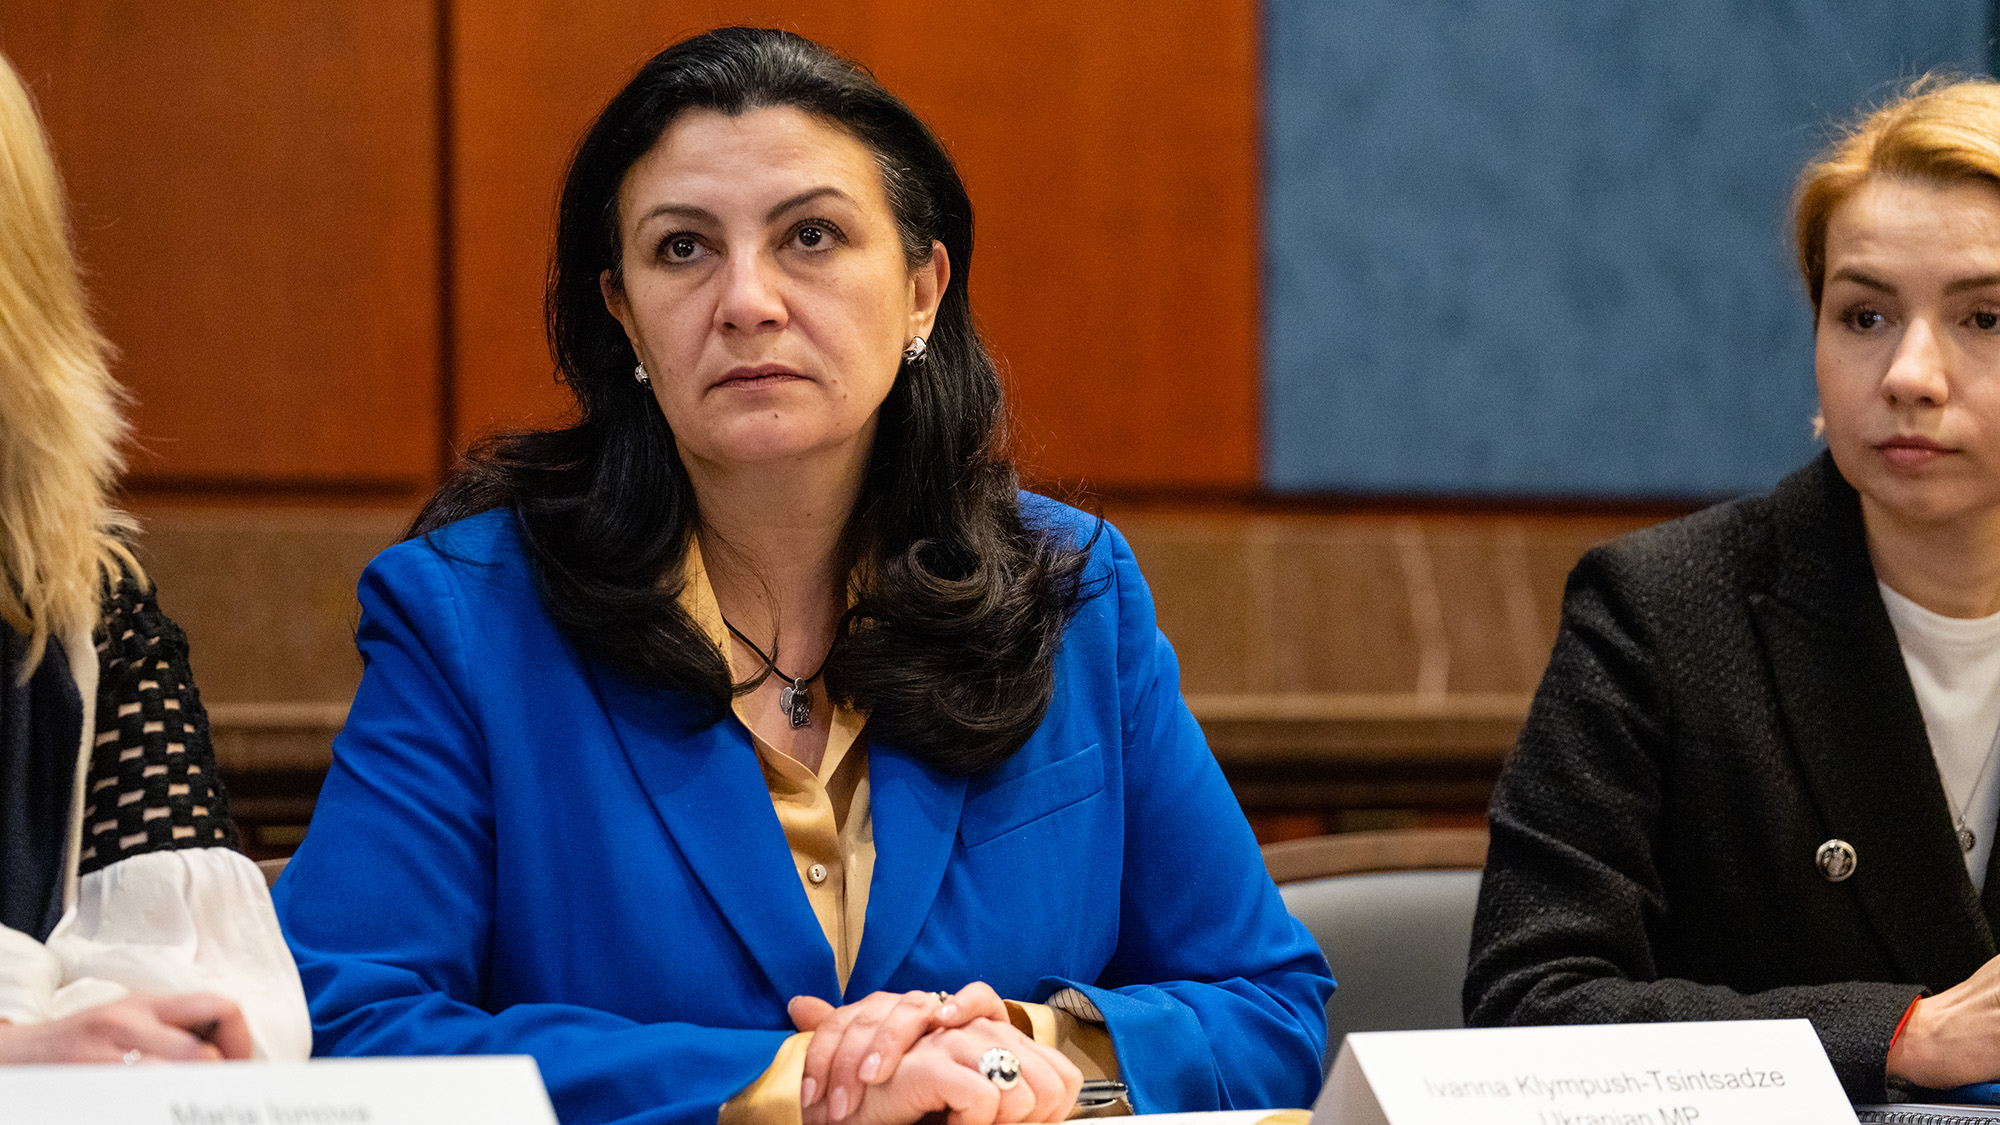 Ivanna Klympush-Tsintsadze, a member of the Ukrainian Parliament, listens during a meeting between the Senate Ukraine Caucus and members of the Ukrainian Parliament and Polish Parliament at the U.S. Capitol on Wednesday, March 30.